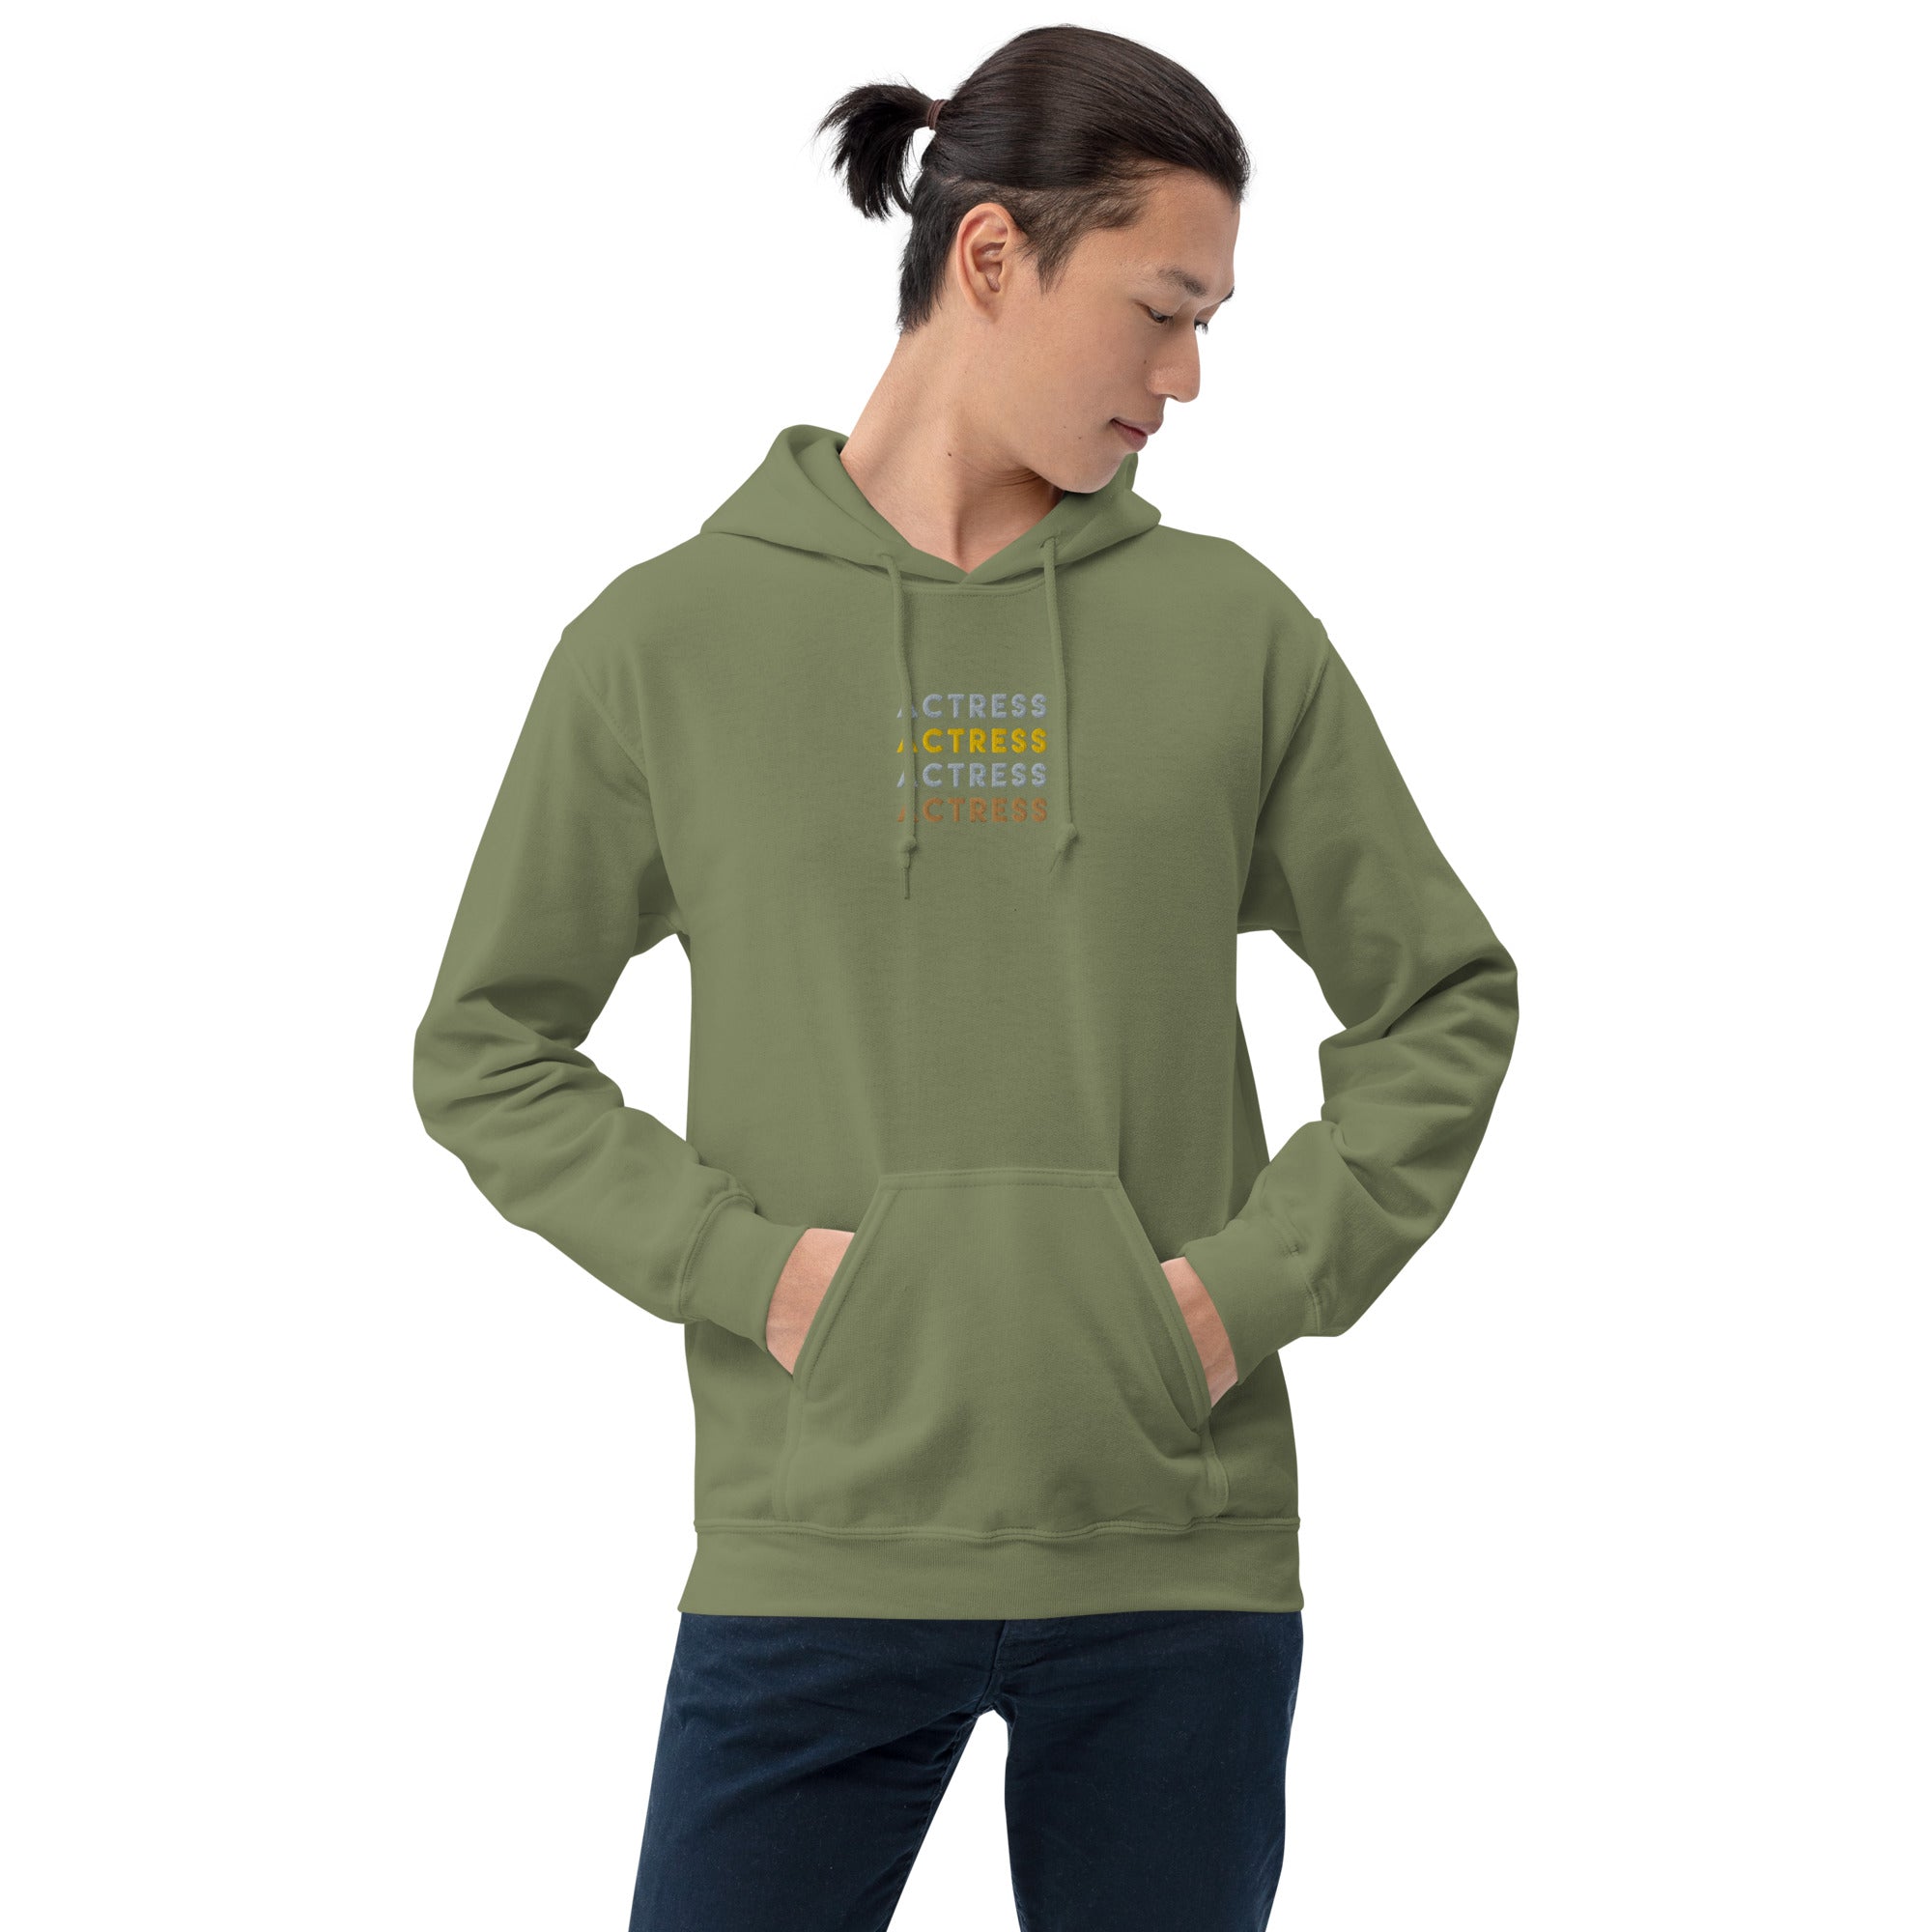 Actress x 4-  Embroidered Staple Unisex Hoodie